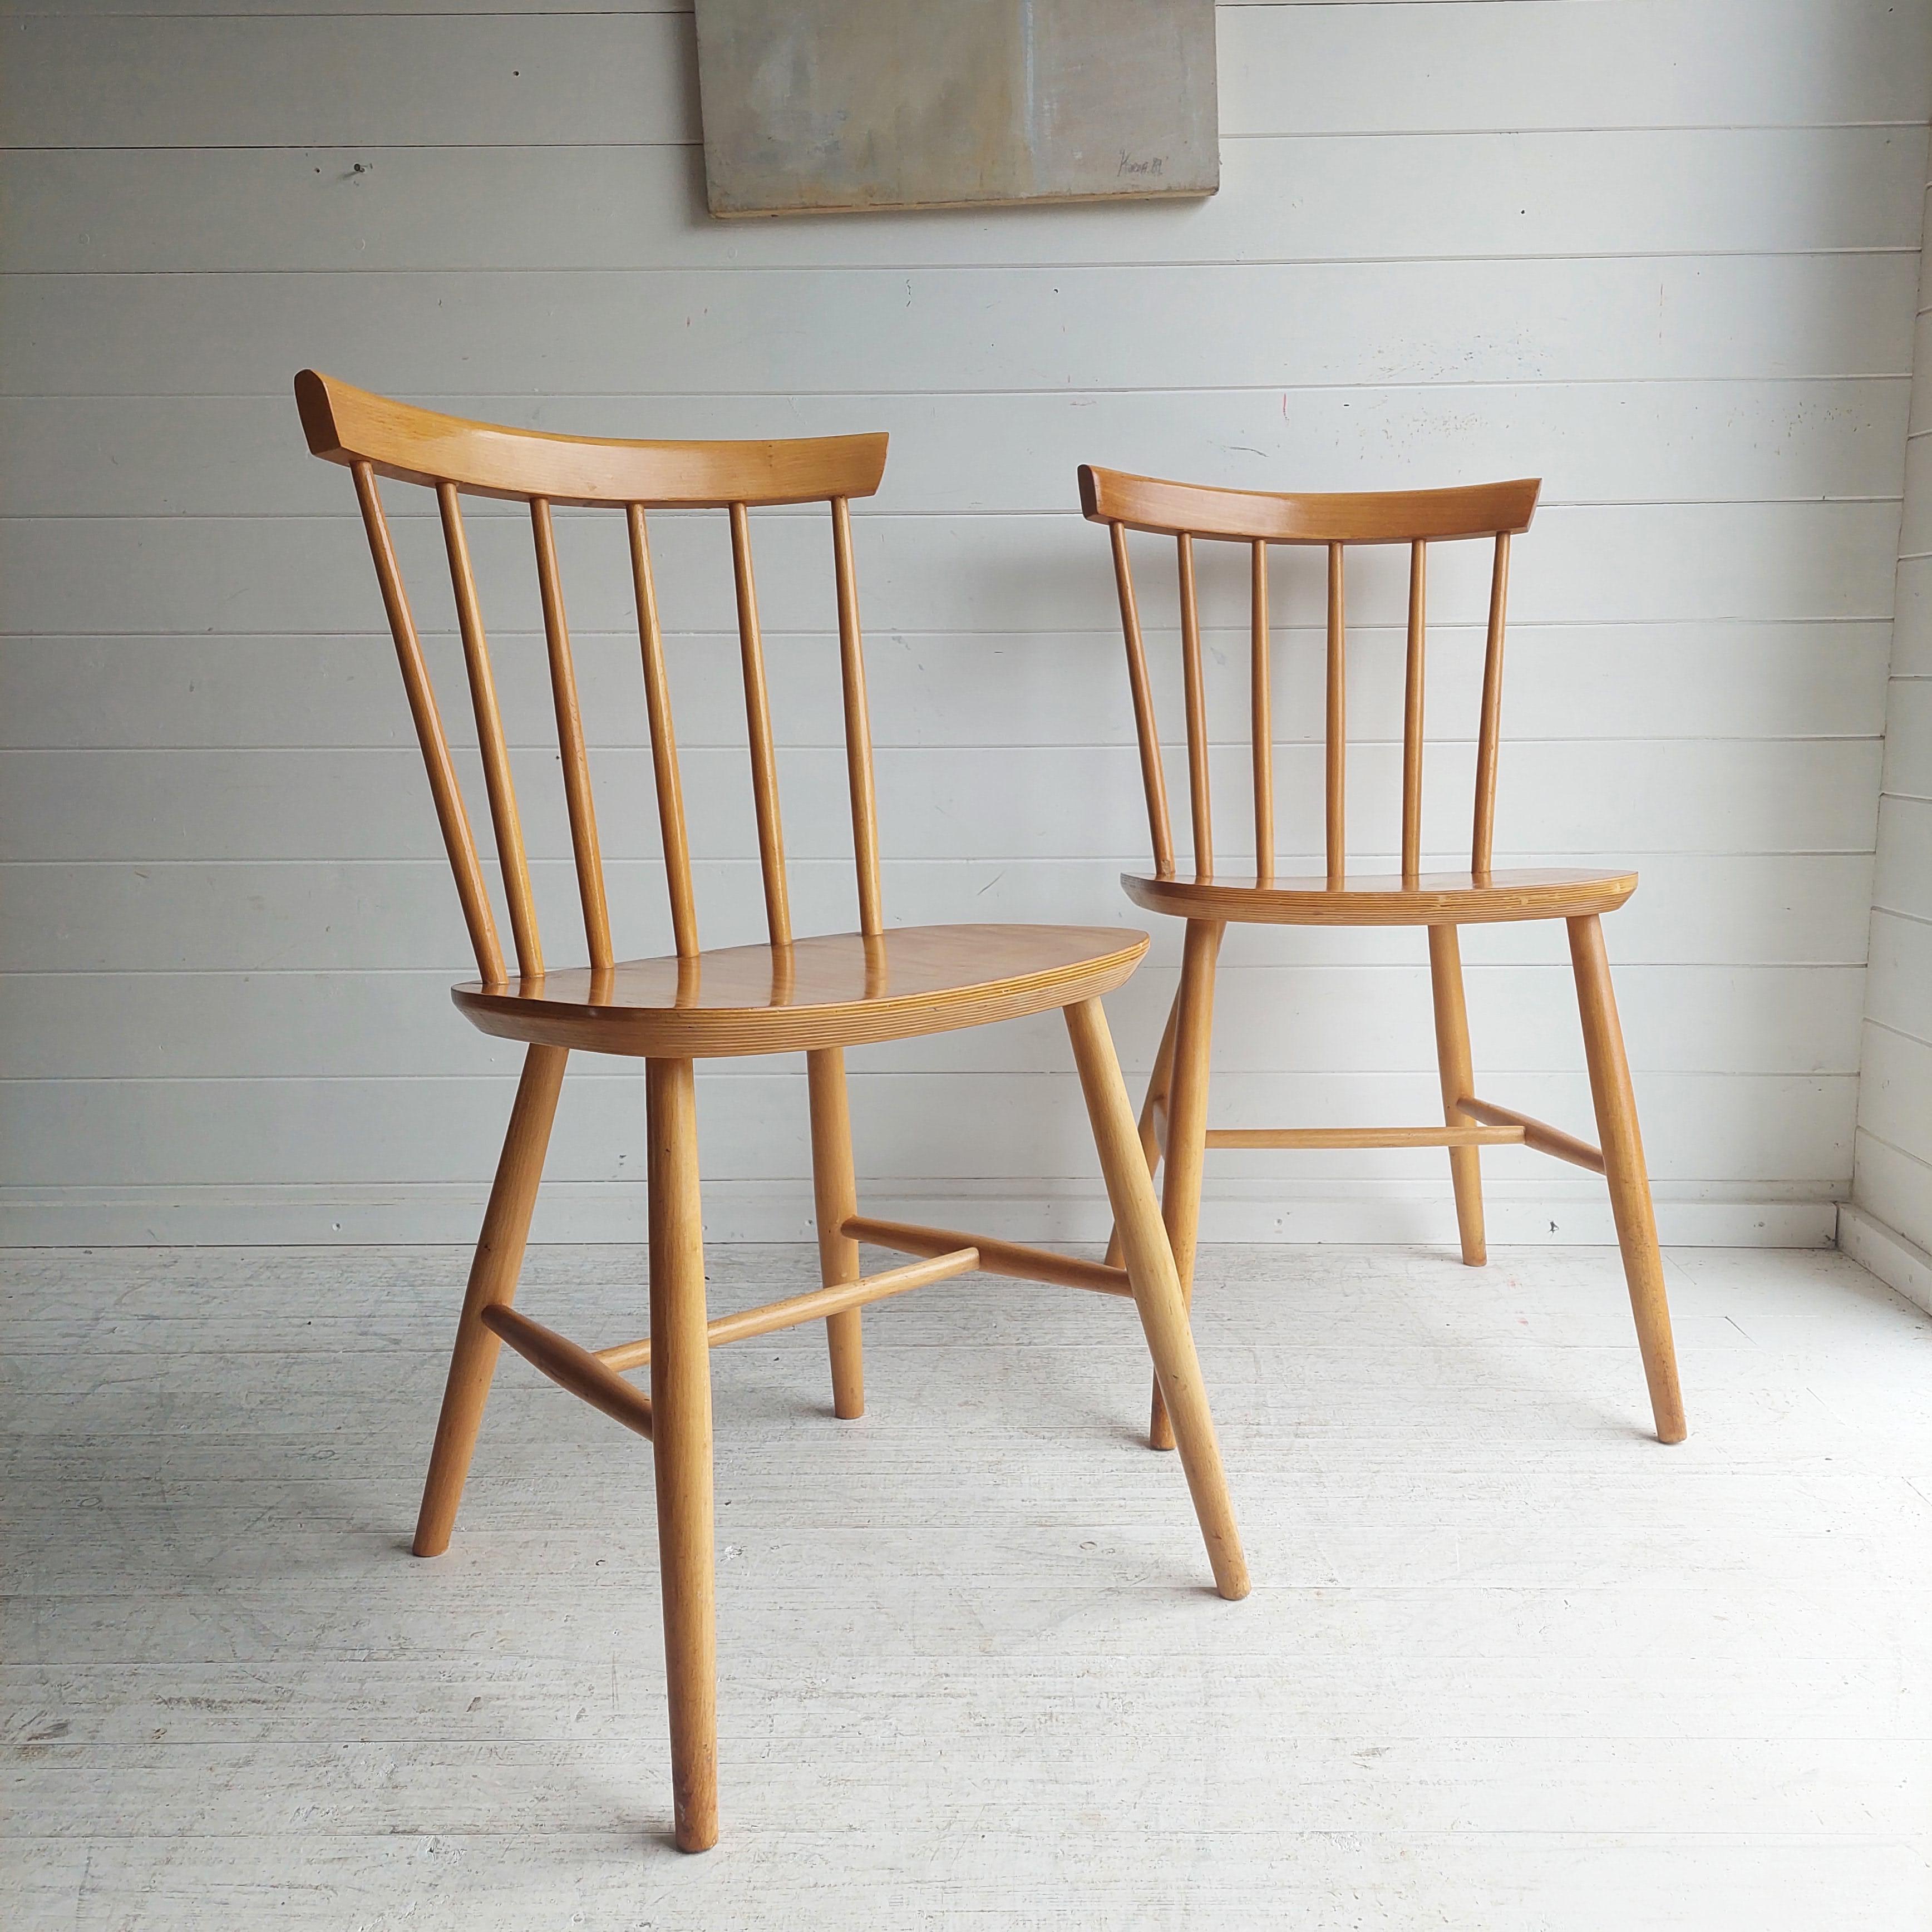 Tapiovaara/ Pinocchio Chair - vintage Chairs
Here is a timeless and indestructible Set of 2 Scandinavian Chairs.
Manufactured by ZPM Radomsko (Polish producer of Thonet).

Set of two Scandinavian beech wooden spindle back dining chairs.
In the style